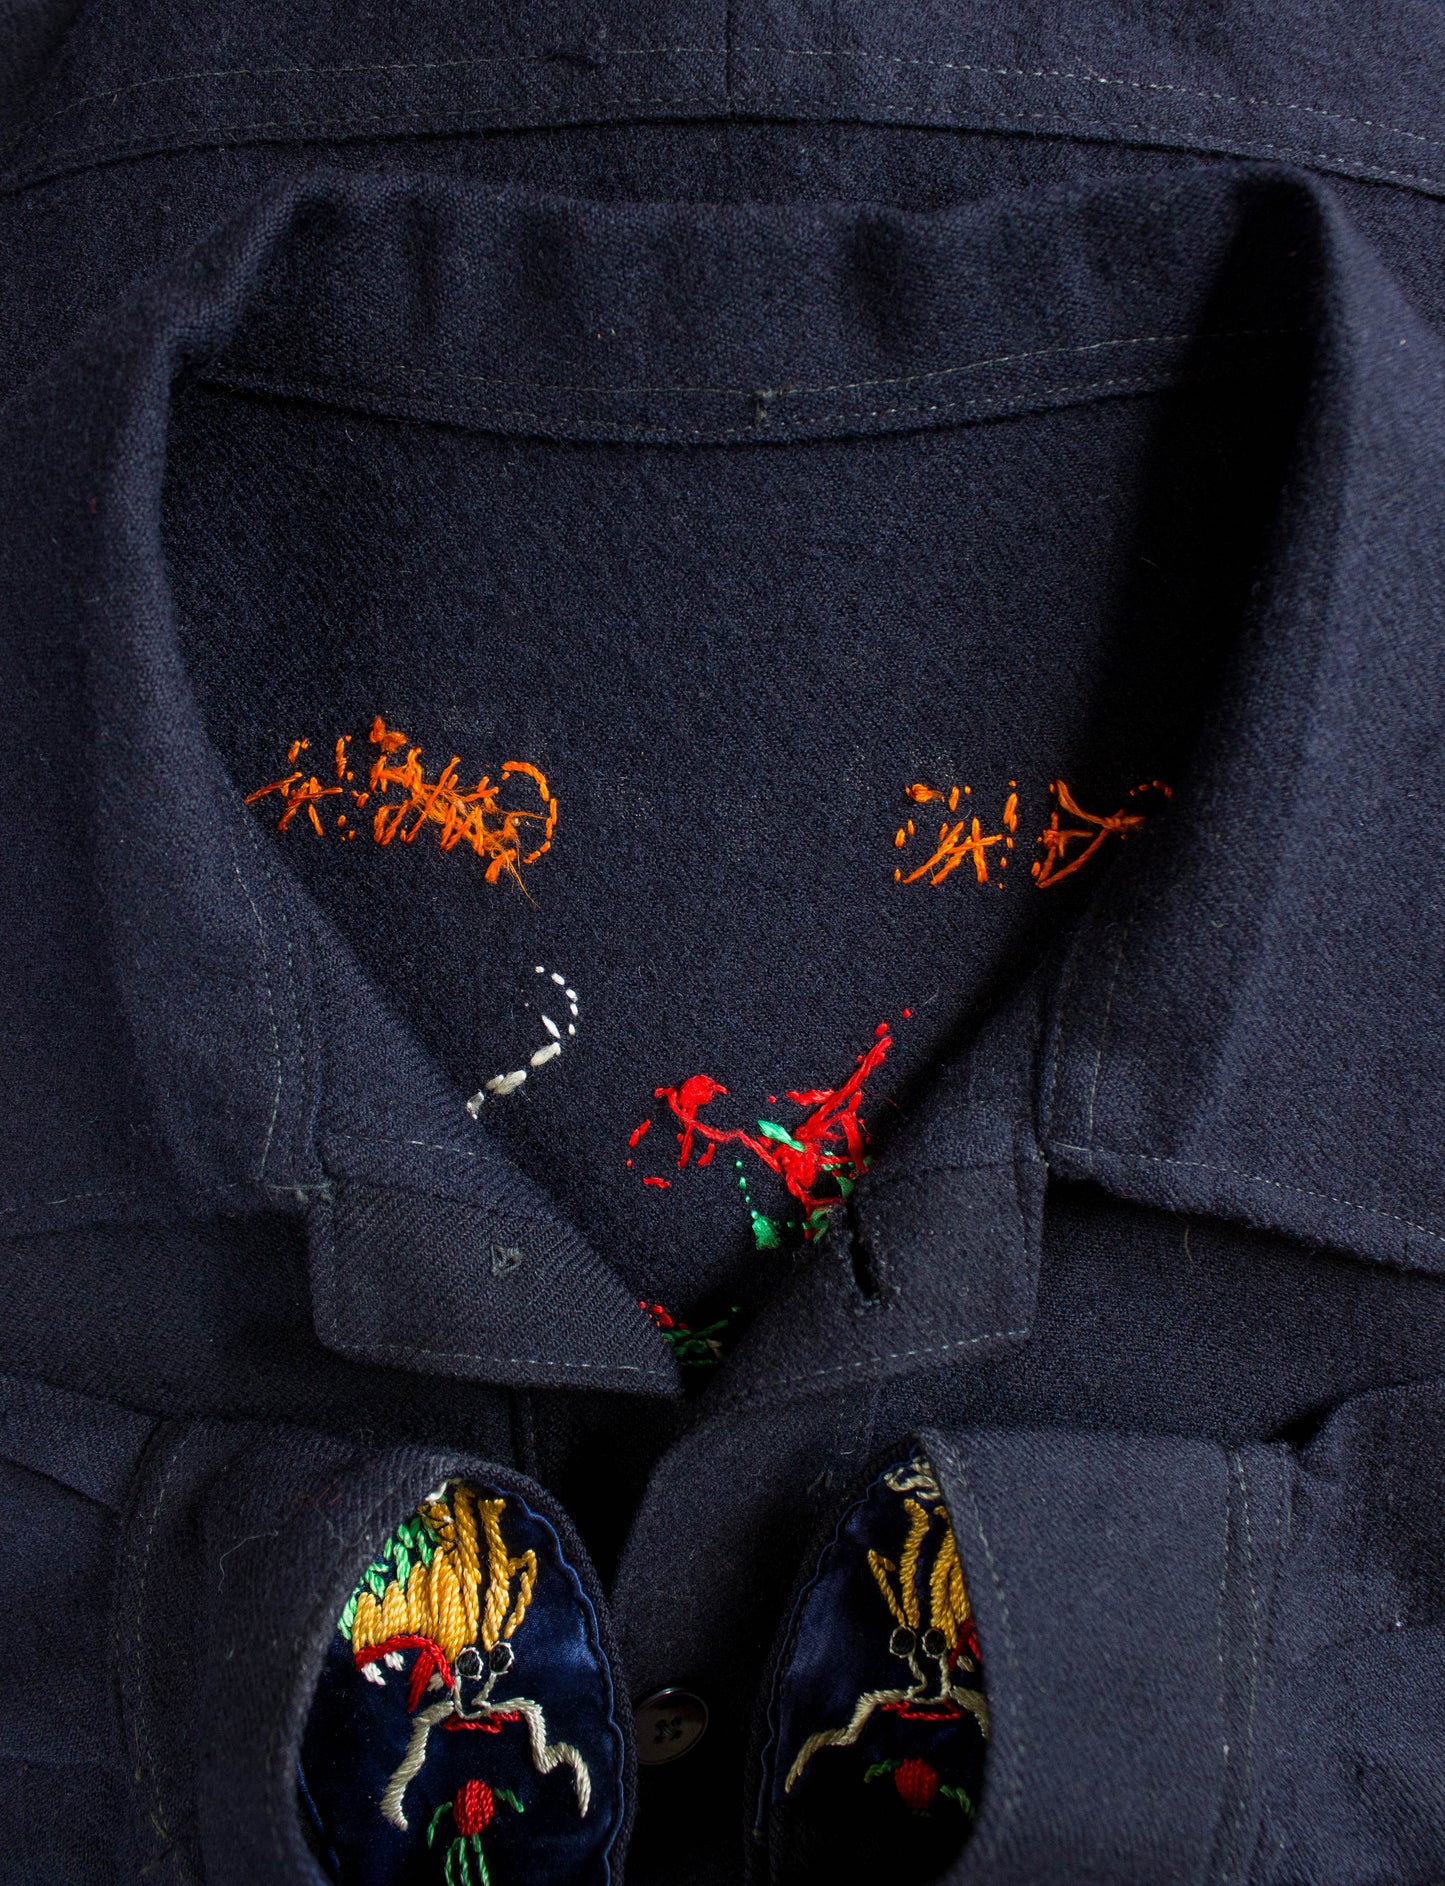 Vintage Shanghai China Cropped Wool Souvenir jacket 1946 Navy Blue Embroidered Dragons Small